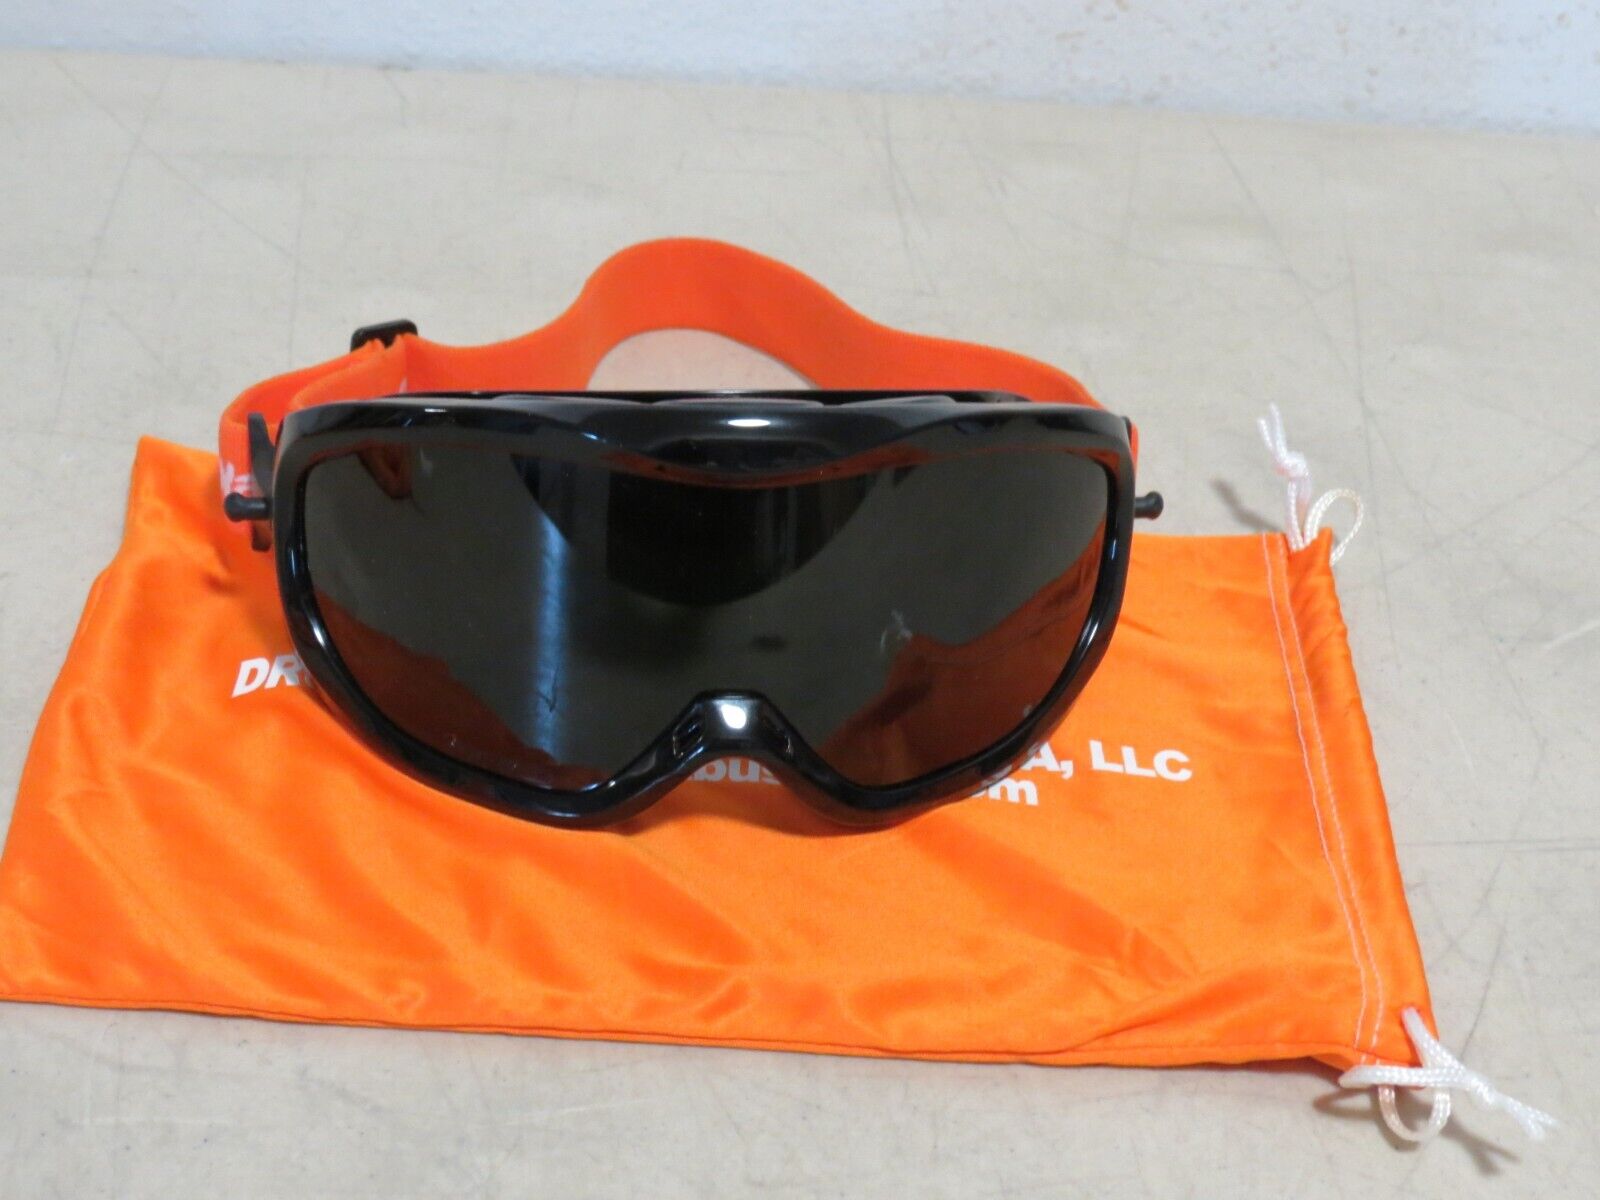 Drunk Busters Totally Wasted Goggles (bac .26-.35) - Orange Strap